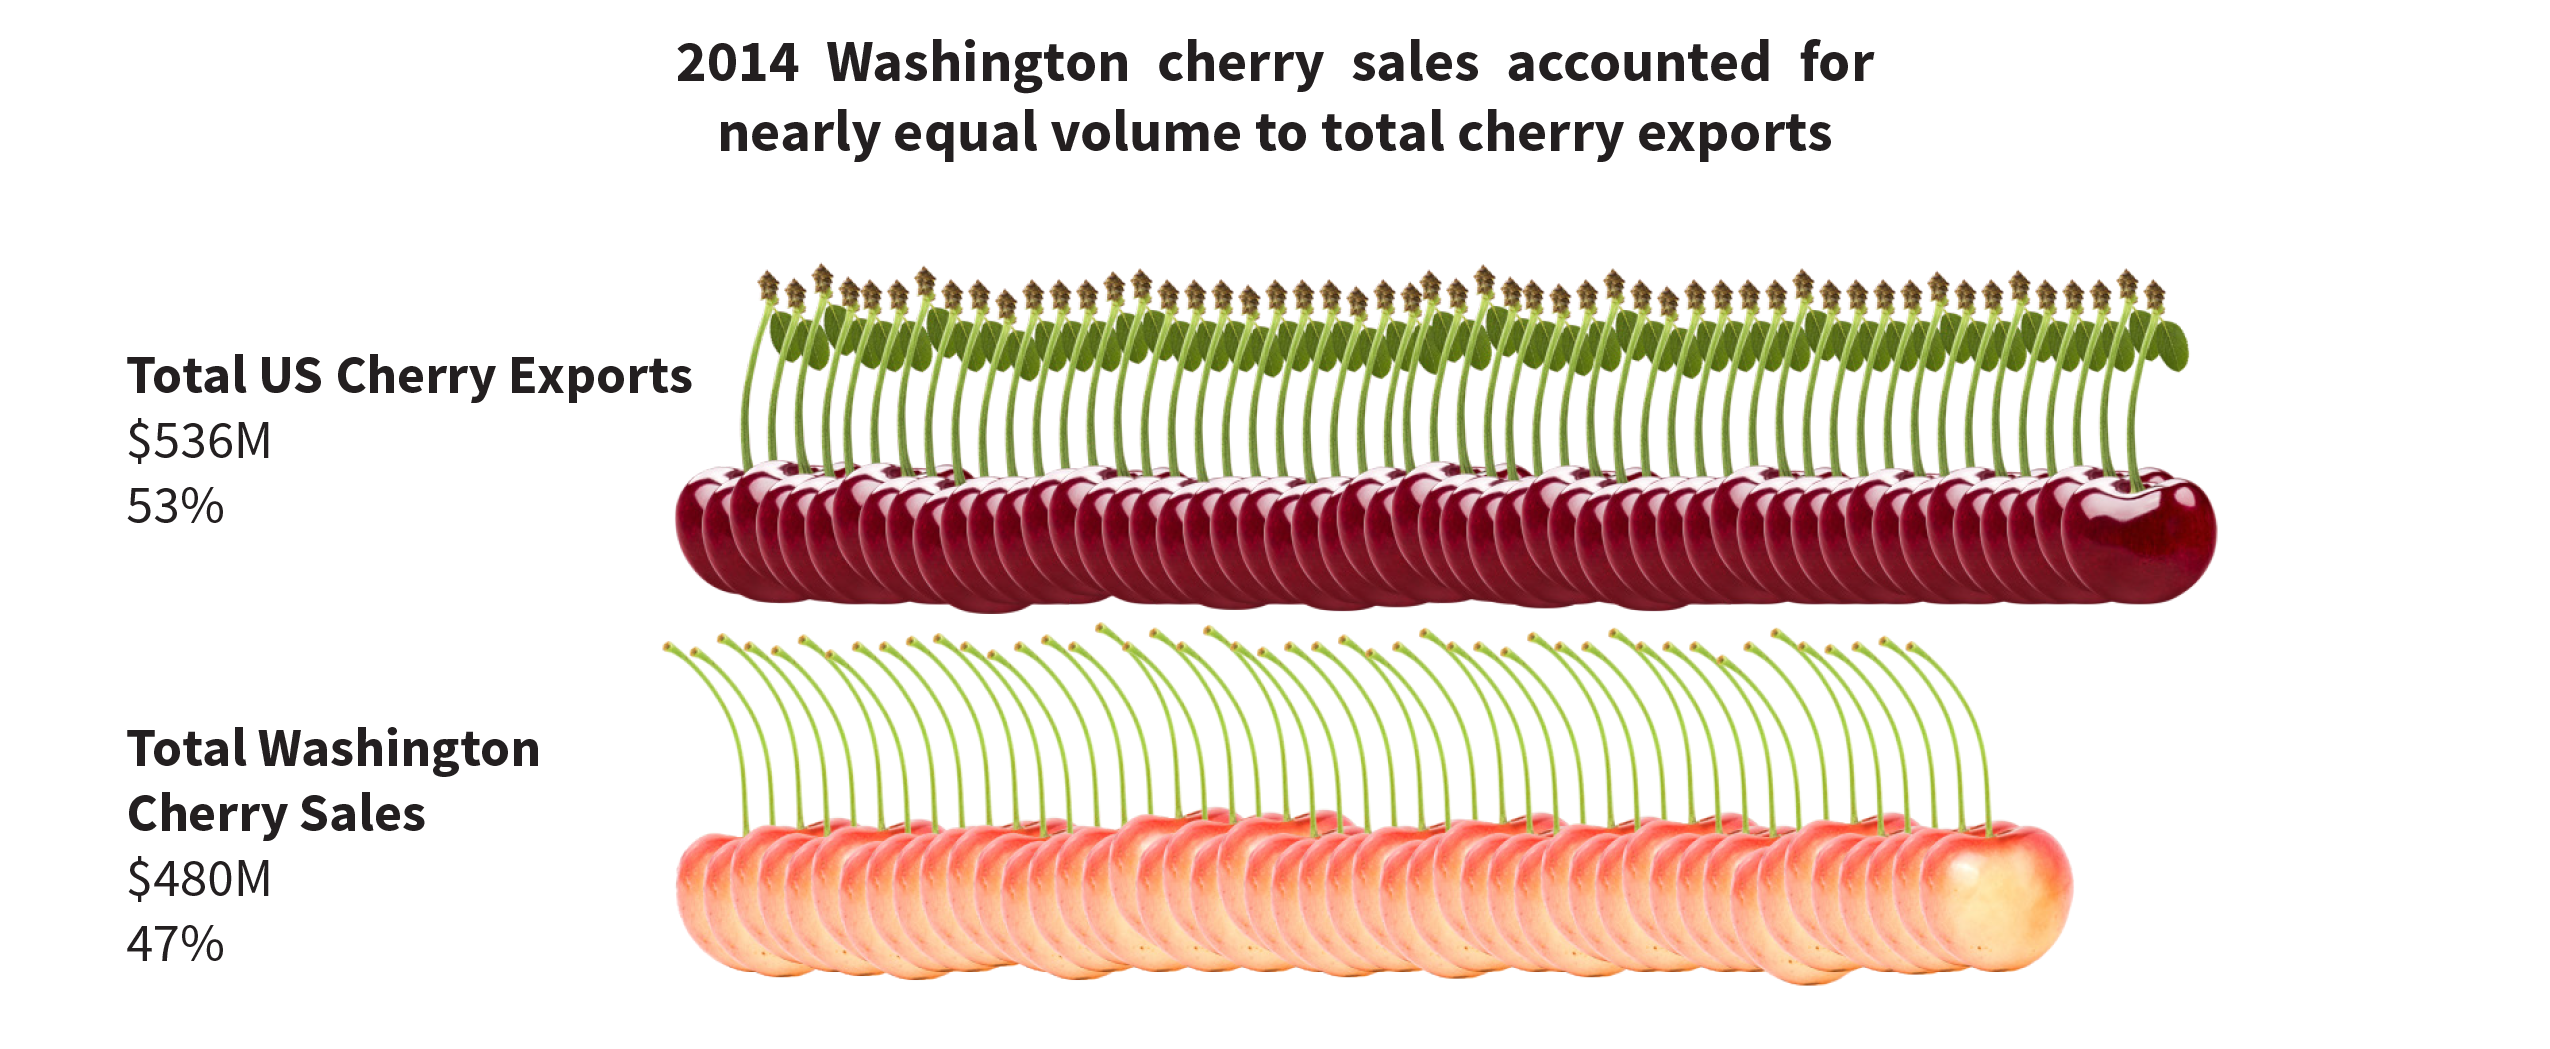 A bar chart made up entirely of cherries